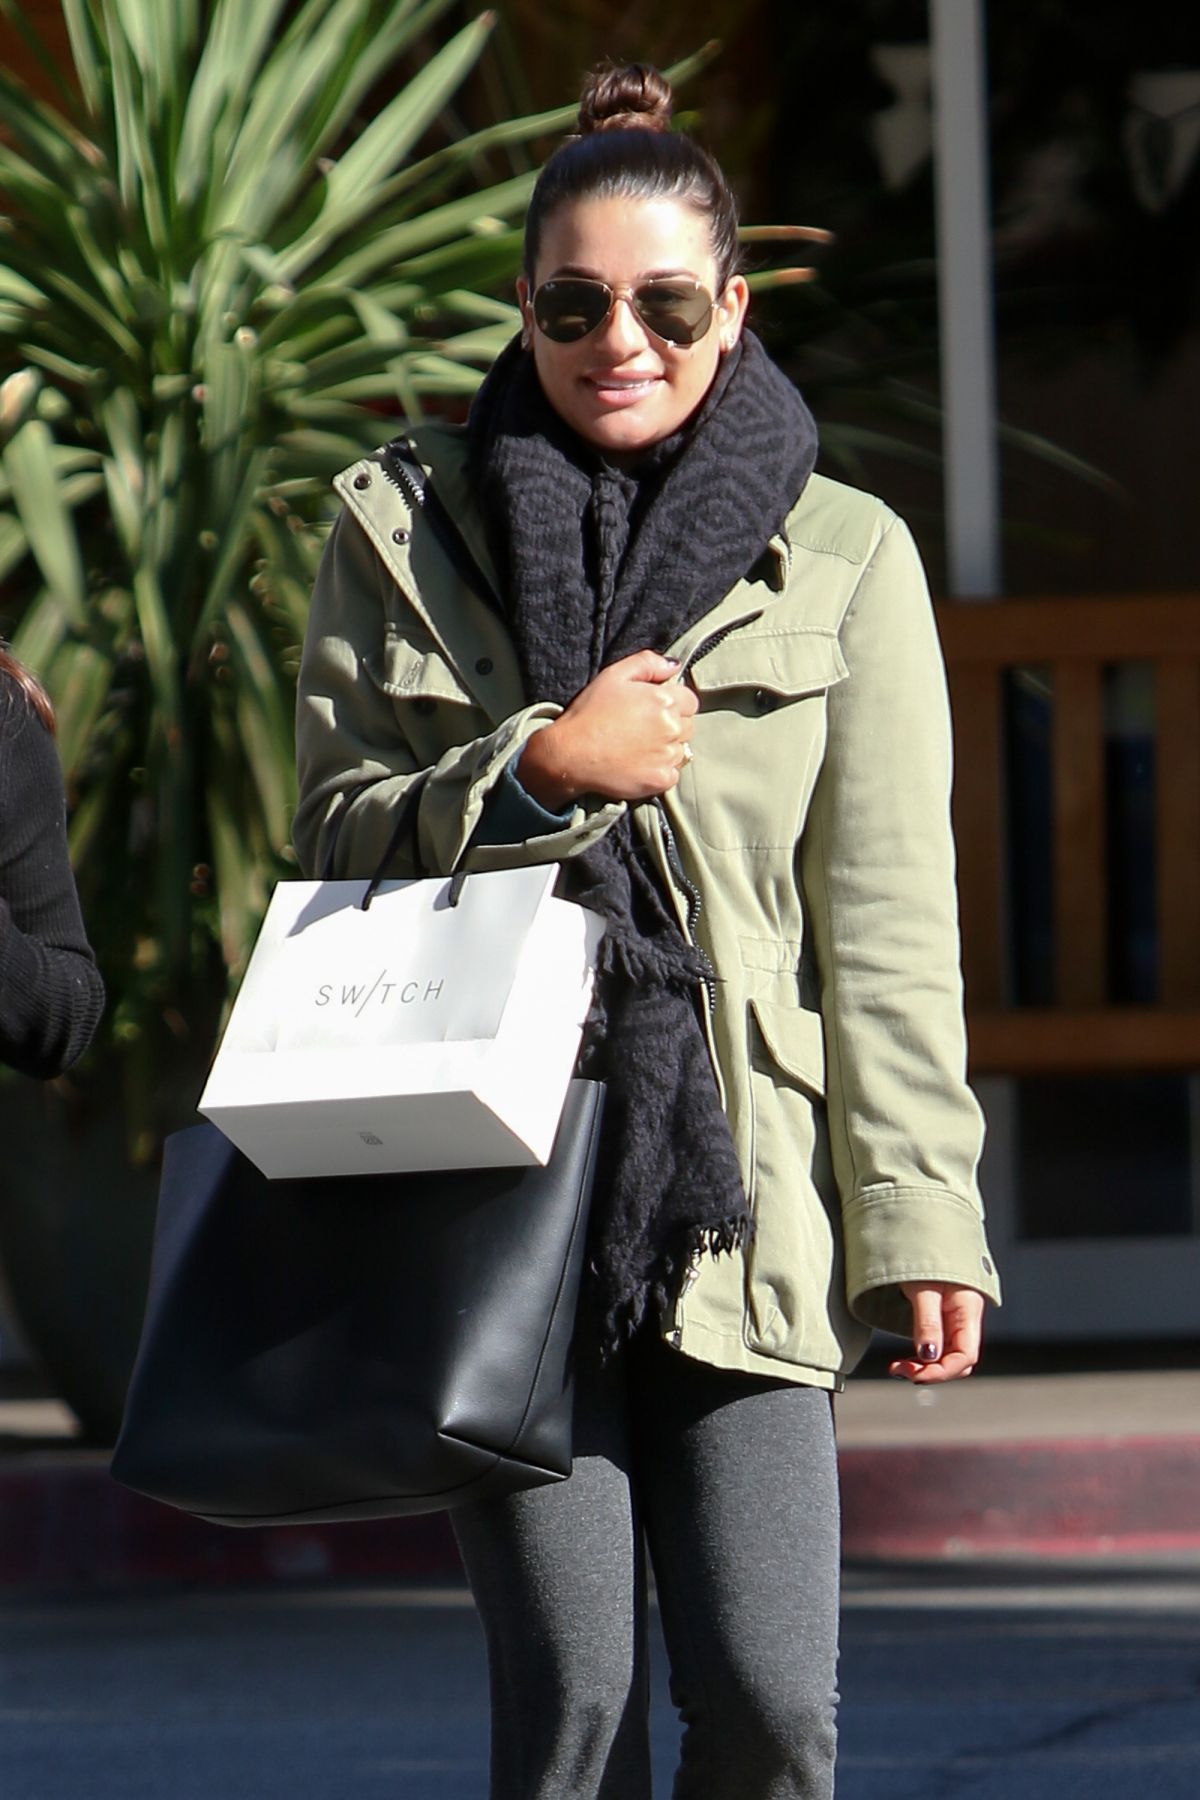 LEA MICHELE Out Shopping in Bel Air 12/02/2016 – HawtCelebs